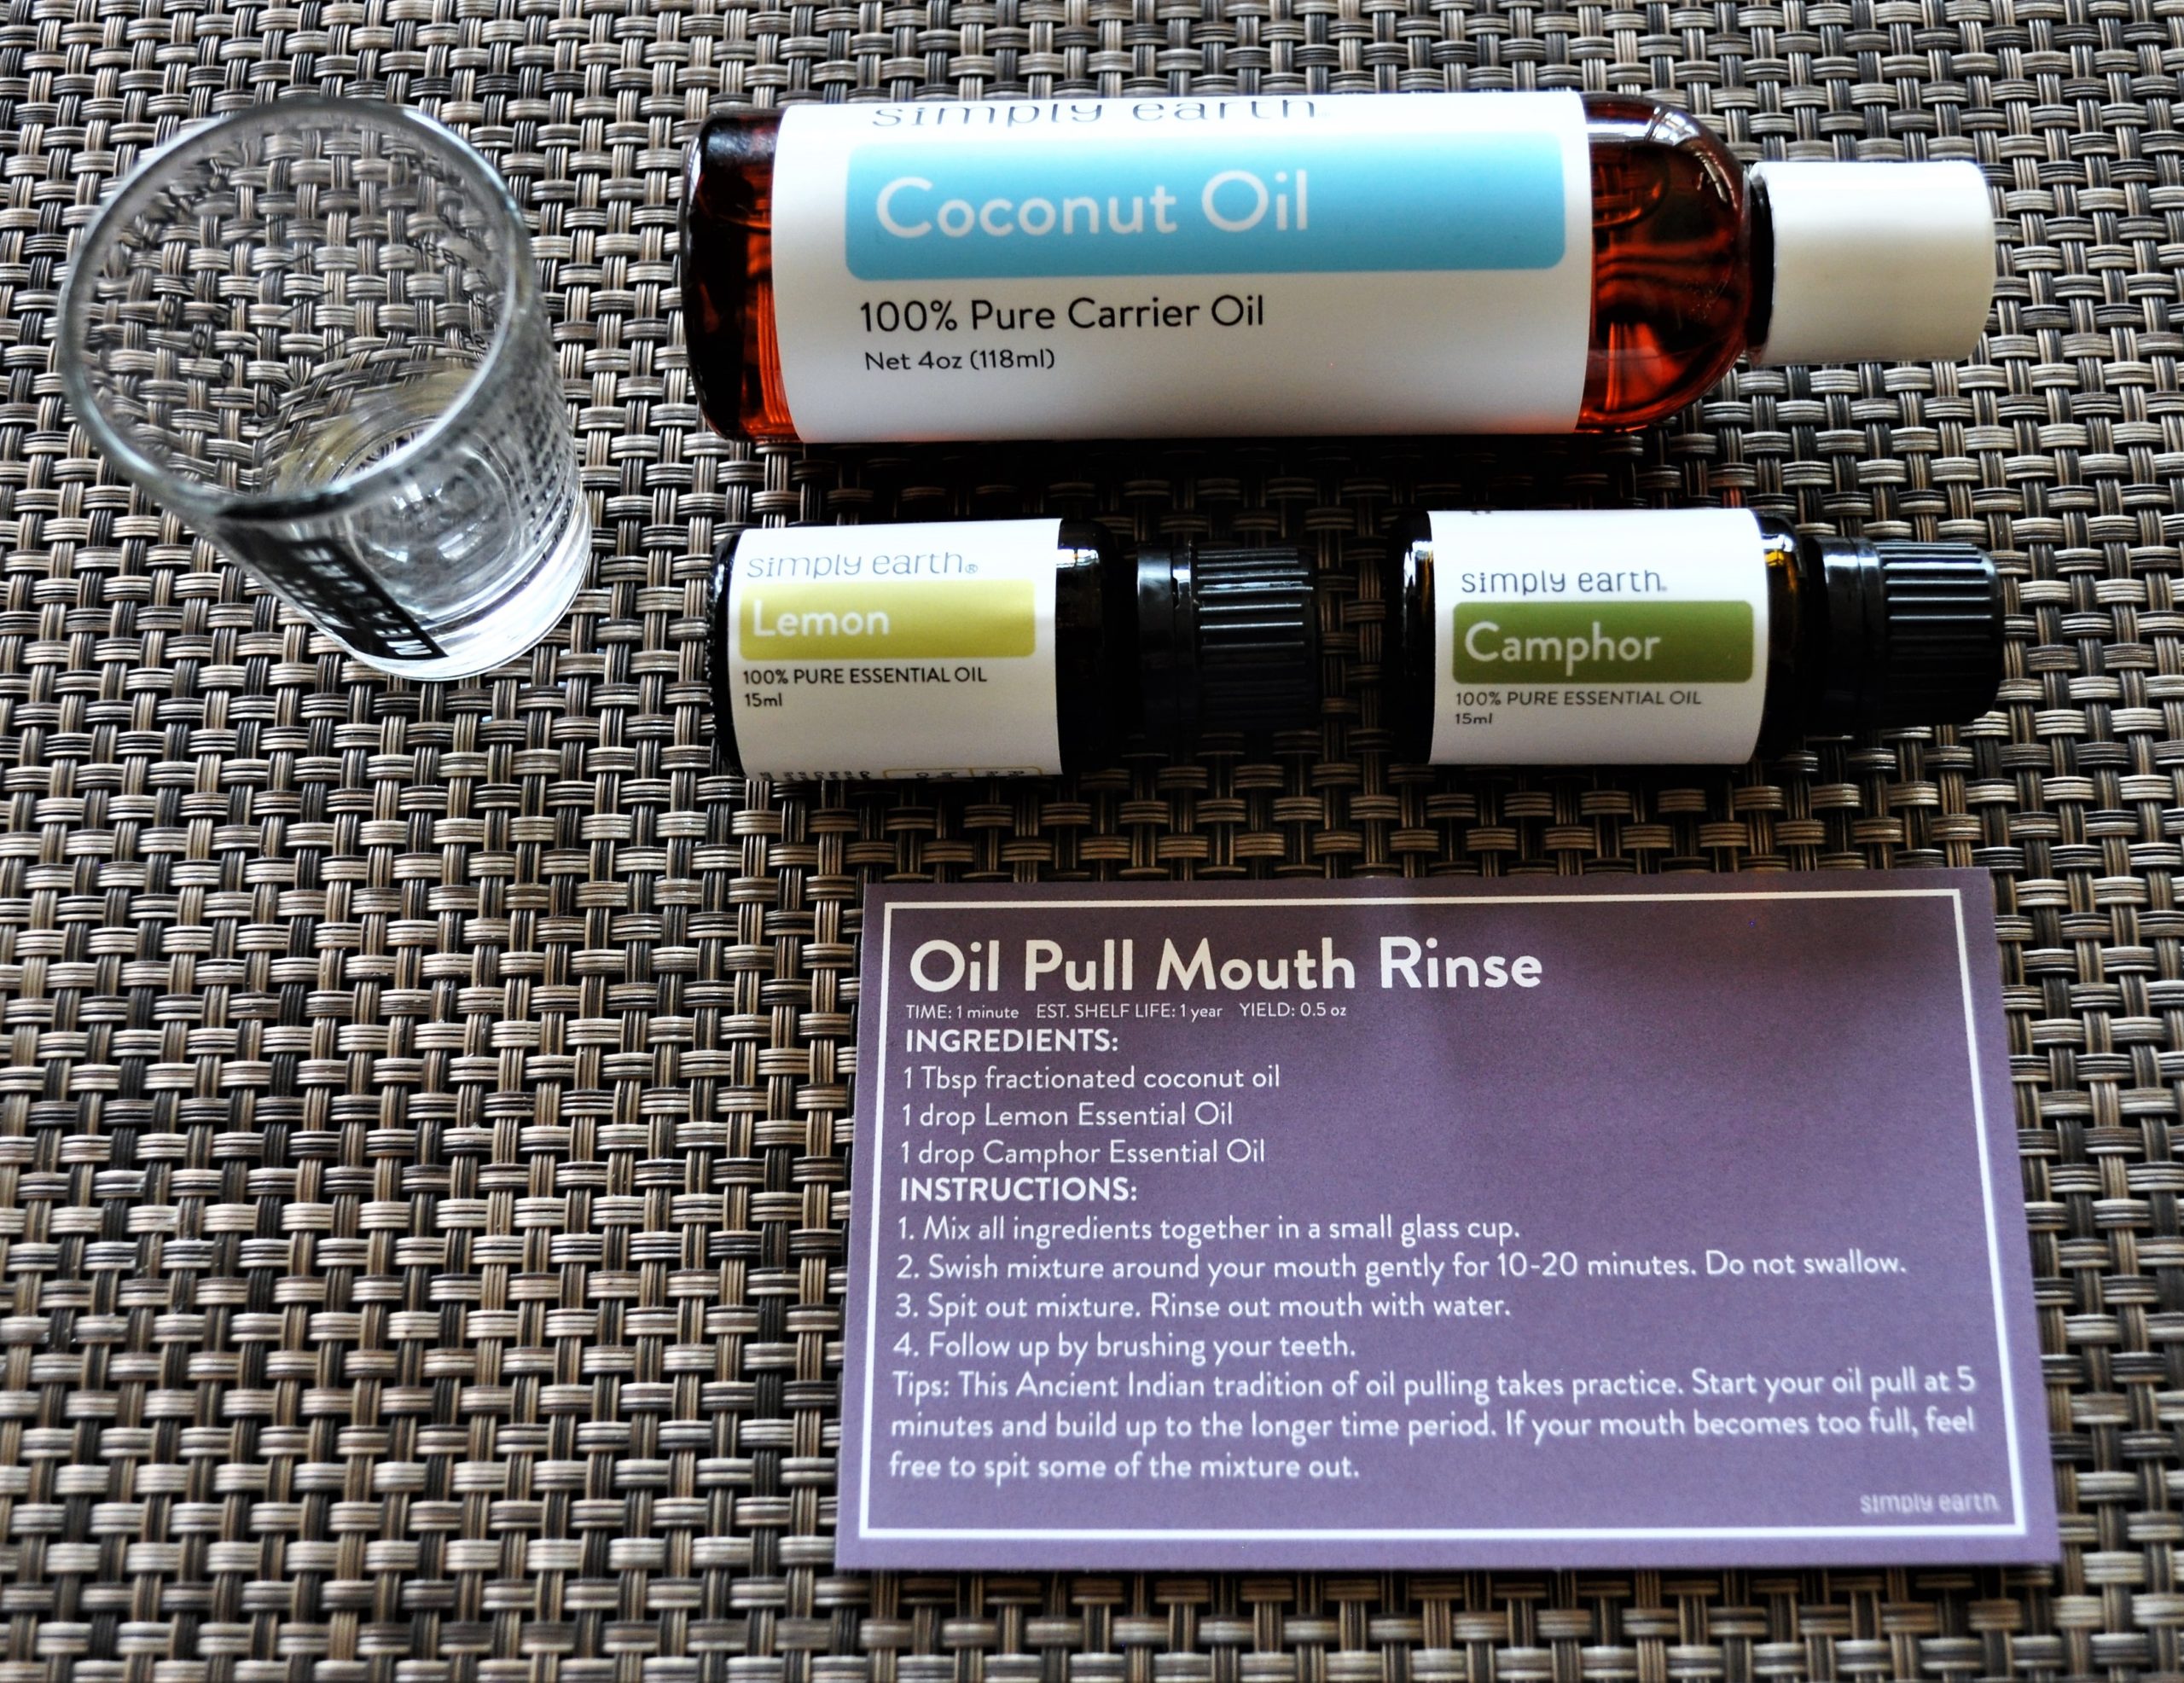 Simply Earth Oil Pull Mouth Rinse Prep